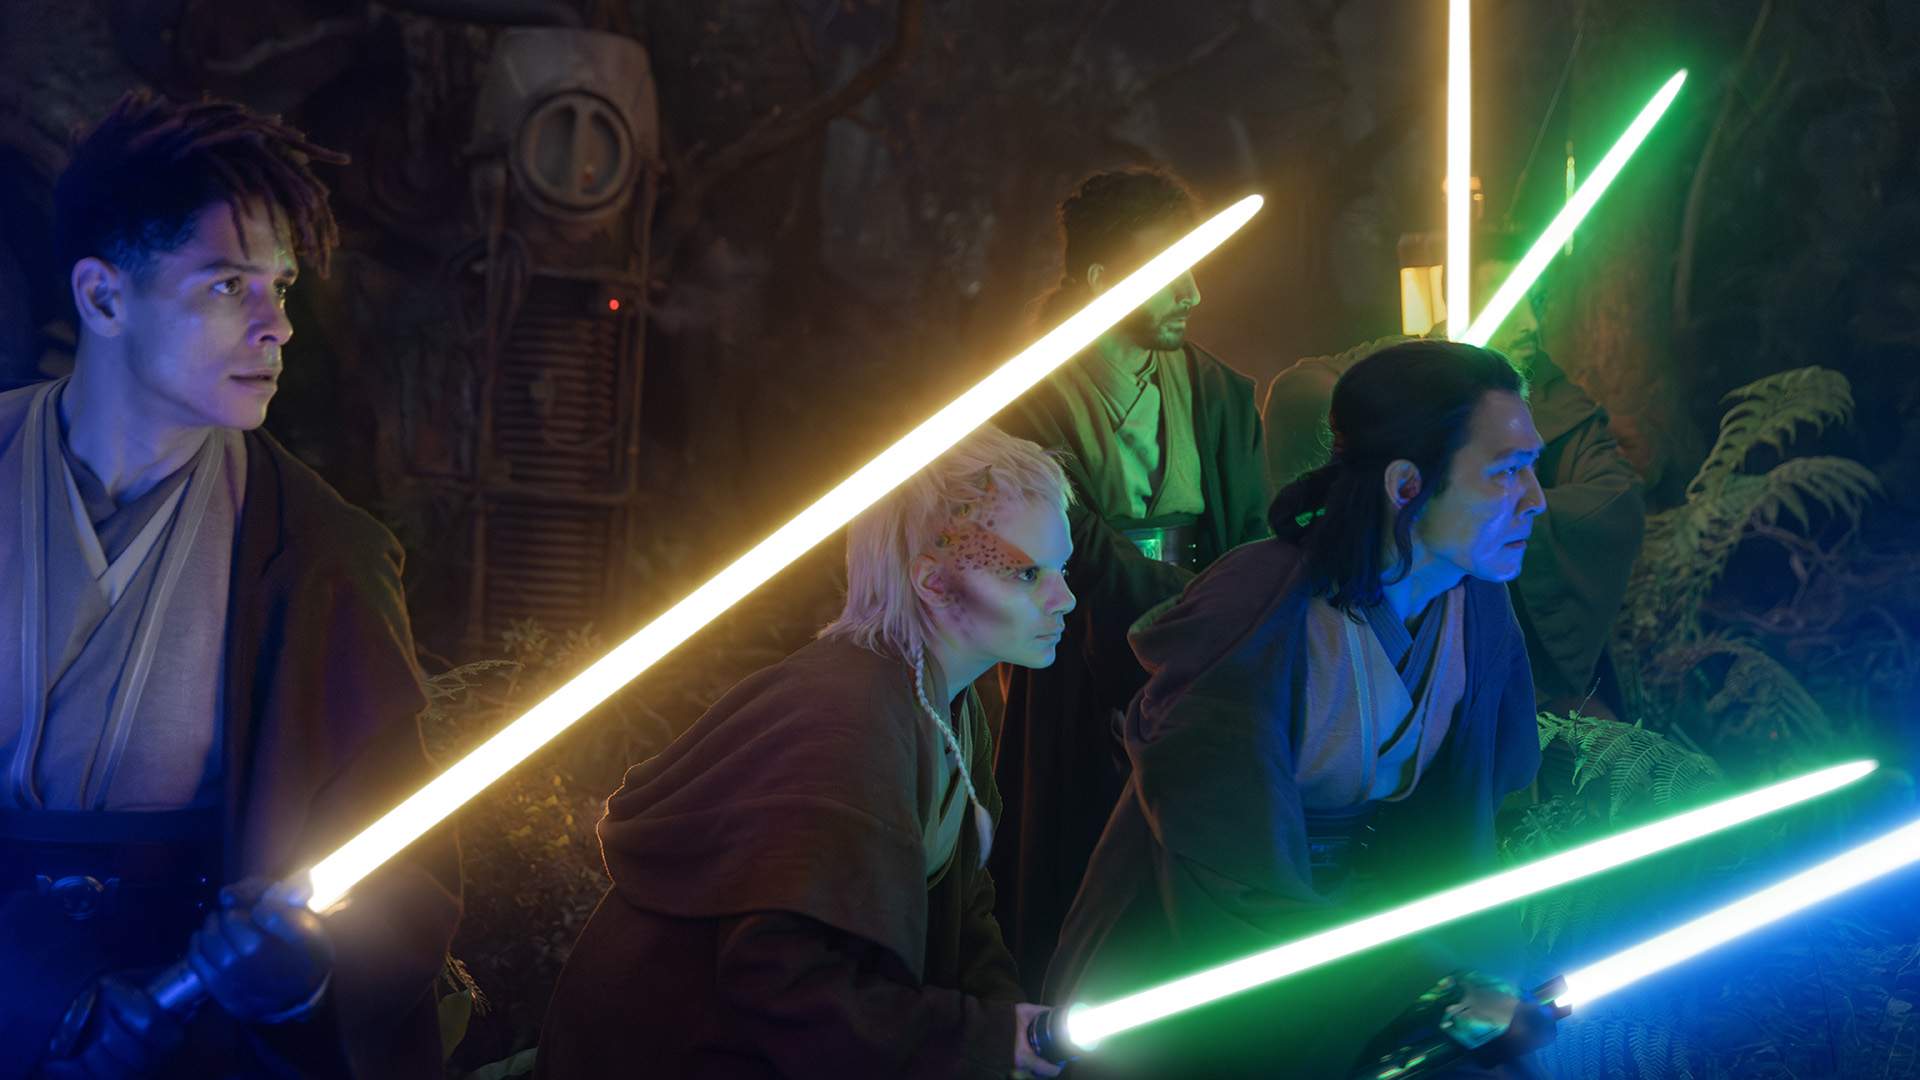 The Jedi Are Under Threat in the New Trailer for 'Star Wars' Murder-Mystery Series 'The Acolyte' 